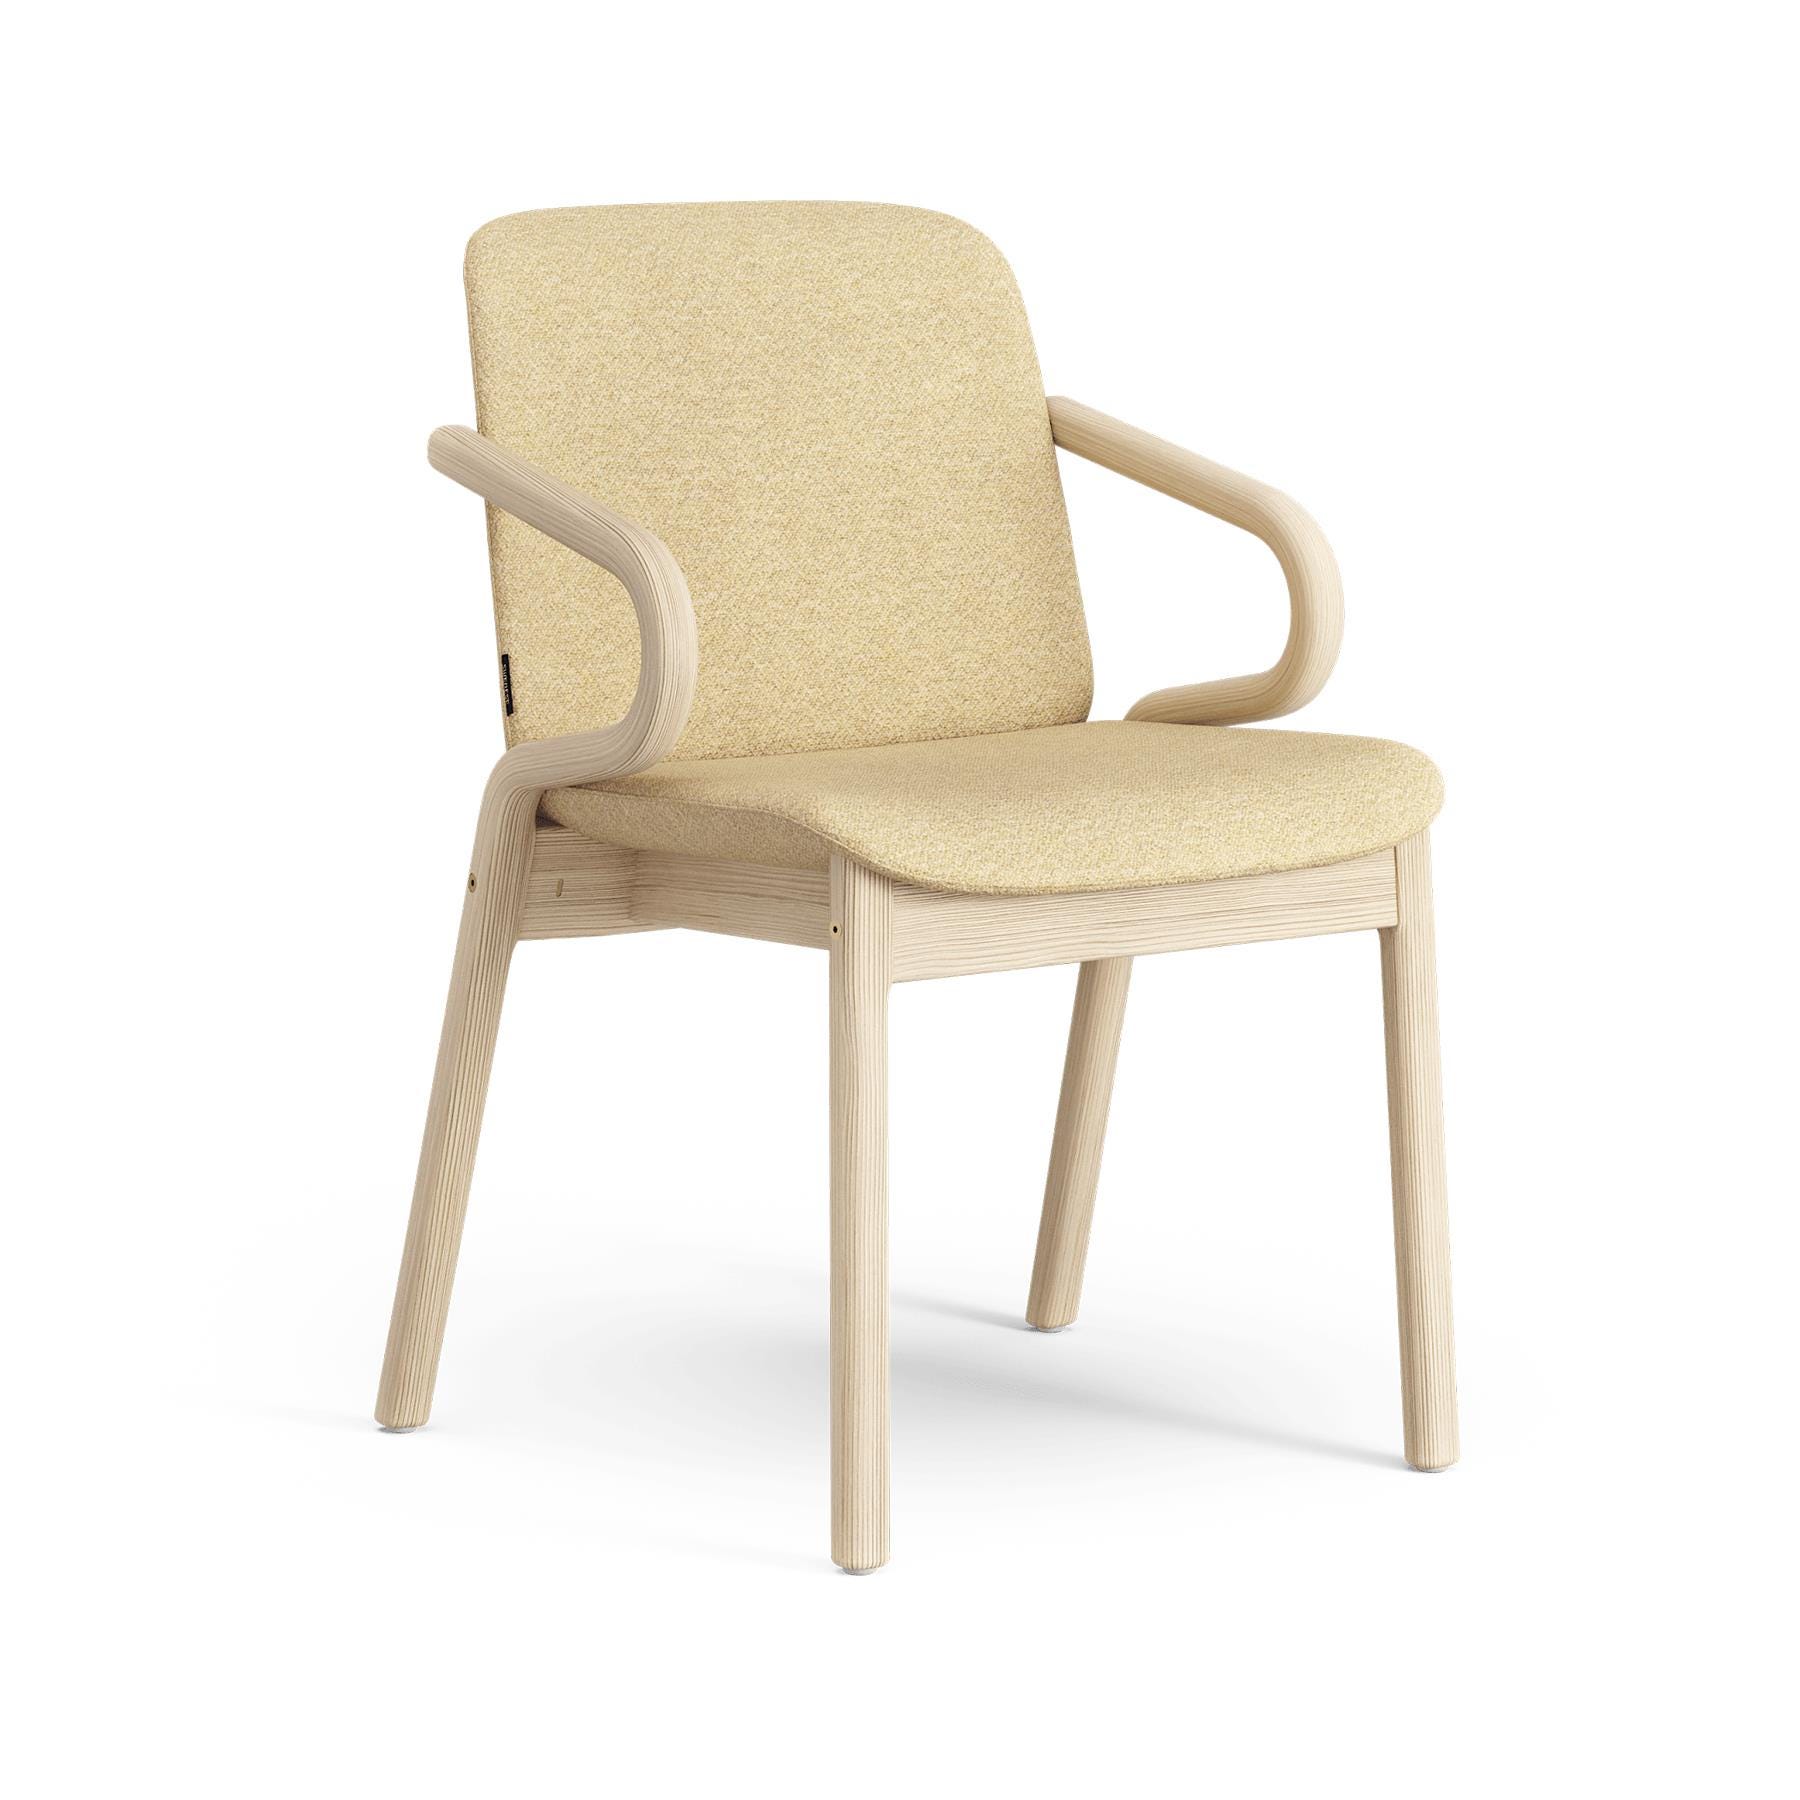 Swedese Amstelle Armchair Natural Ash Ecriture 0410 Cream Designer Furniture From Holloways Of Ludlow